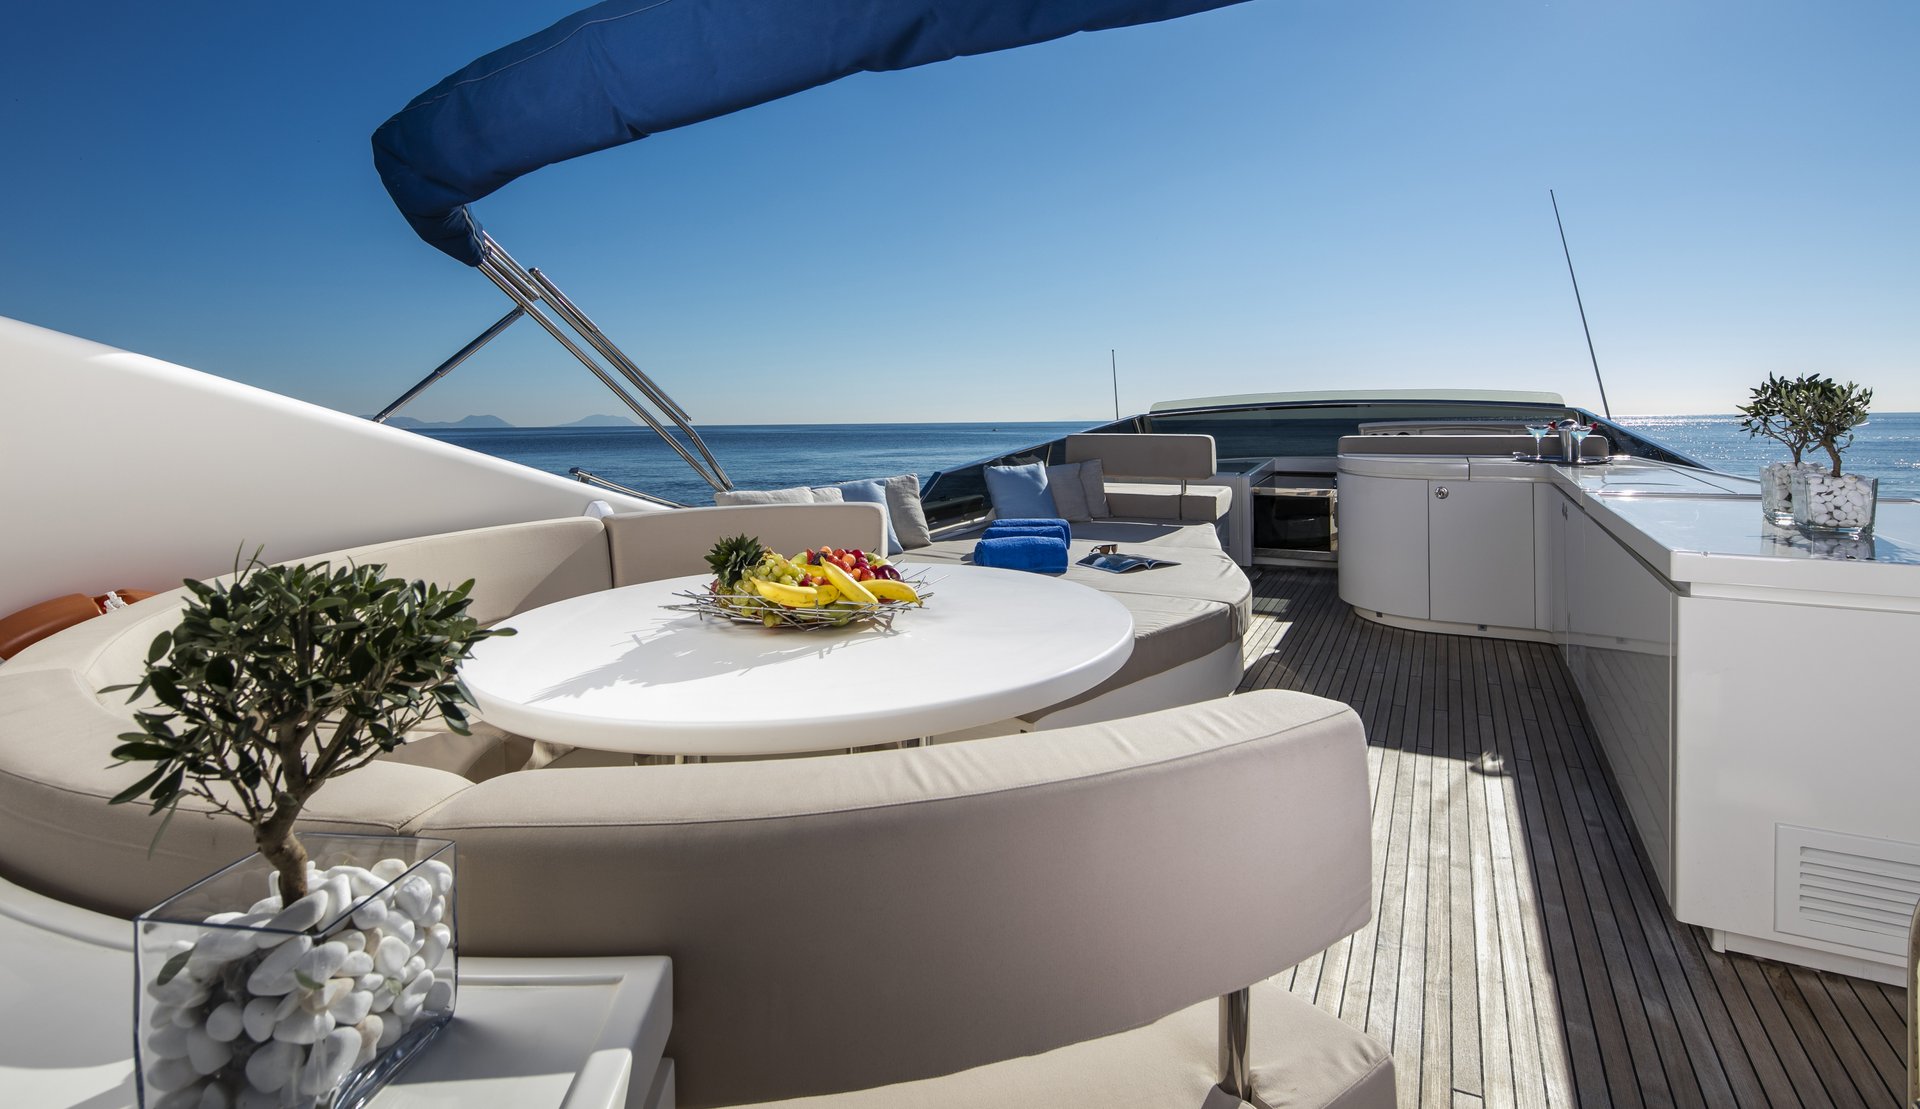 M/Y Mythos yacht for sale outdoor dining